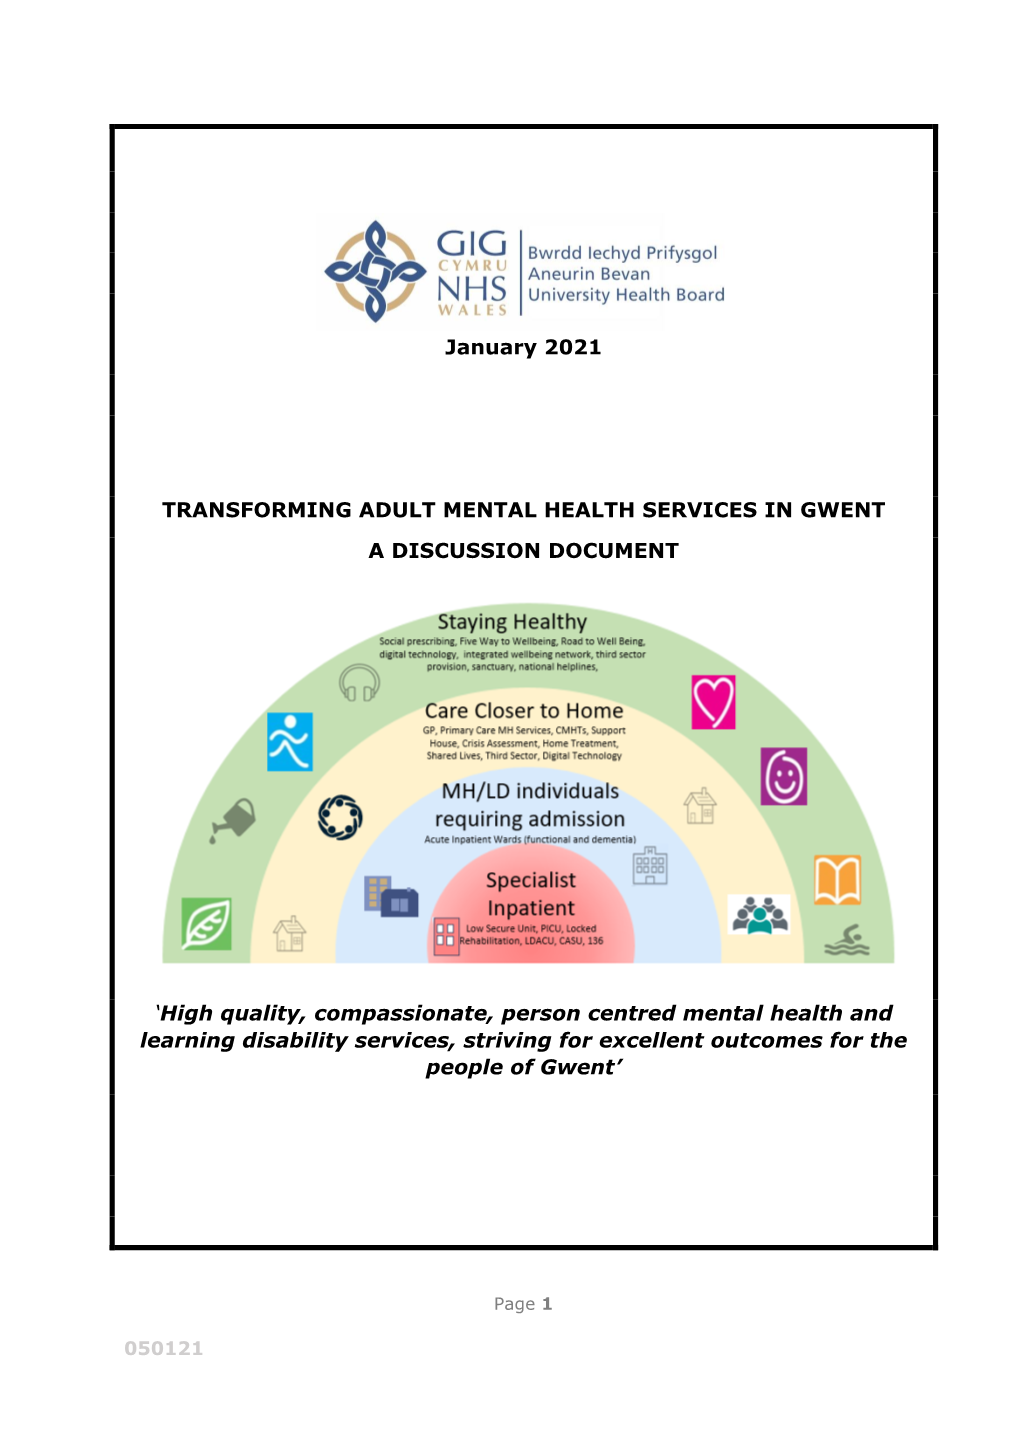 Transforming Mental Health Services in Gwent